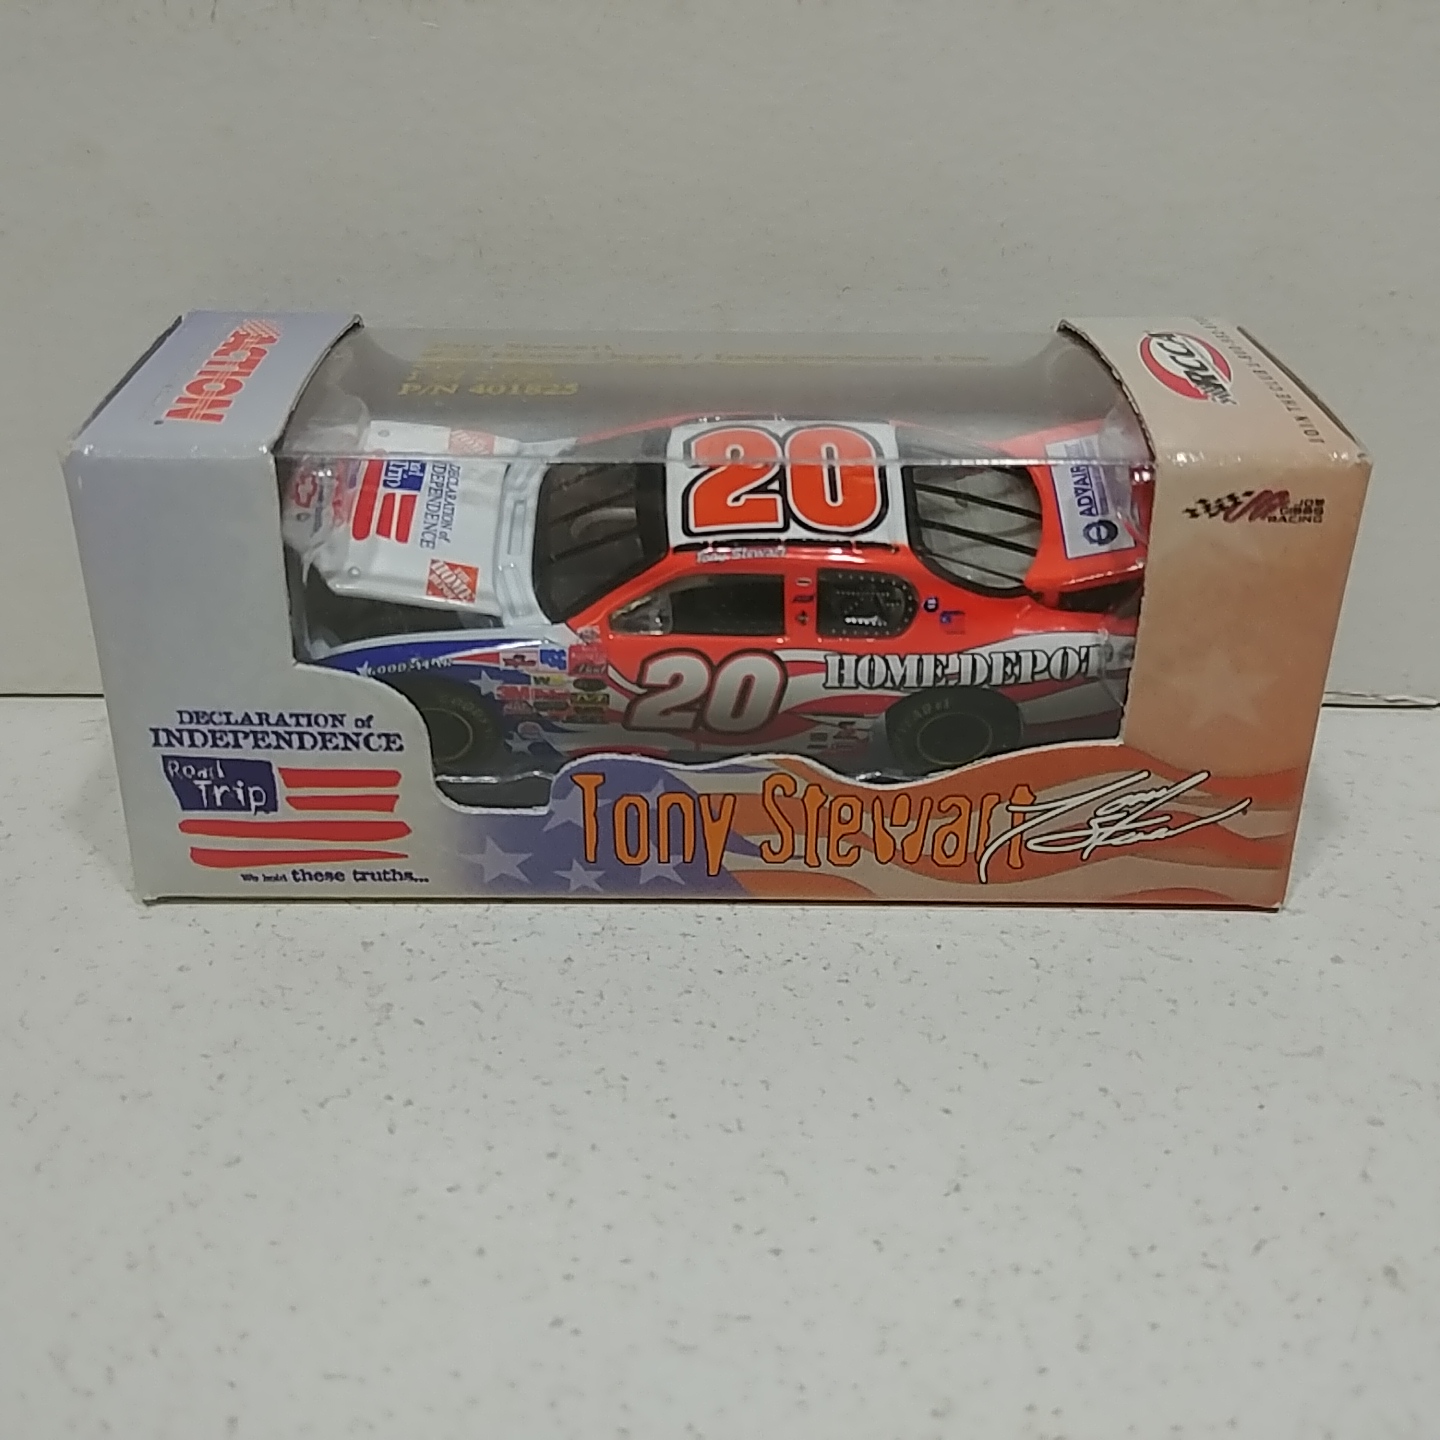 2003 Tony Steawrt 1/64th Home Depot "Independence Day" RCCA hood open Monte Carlo